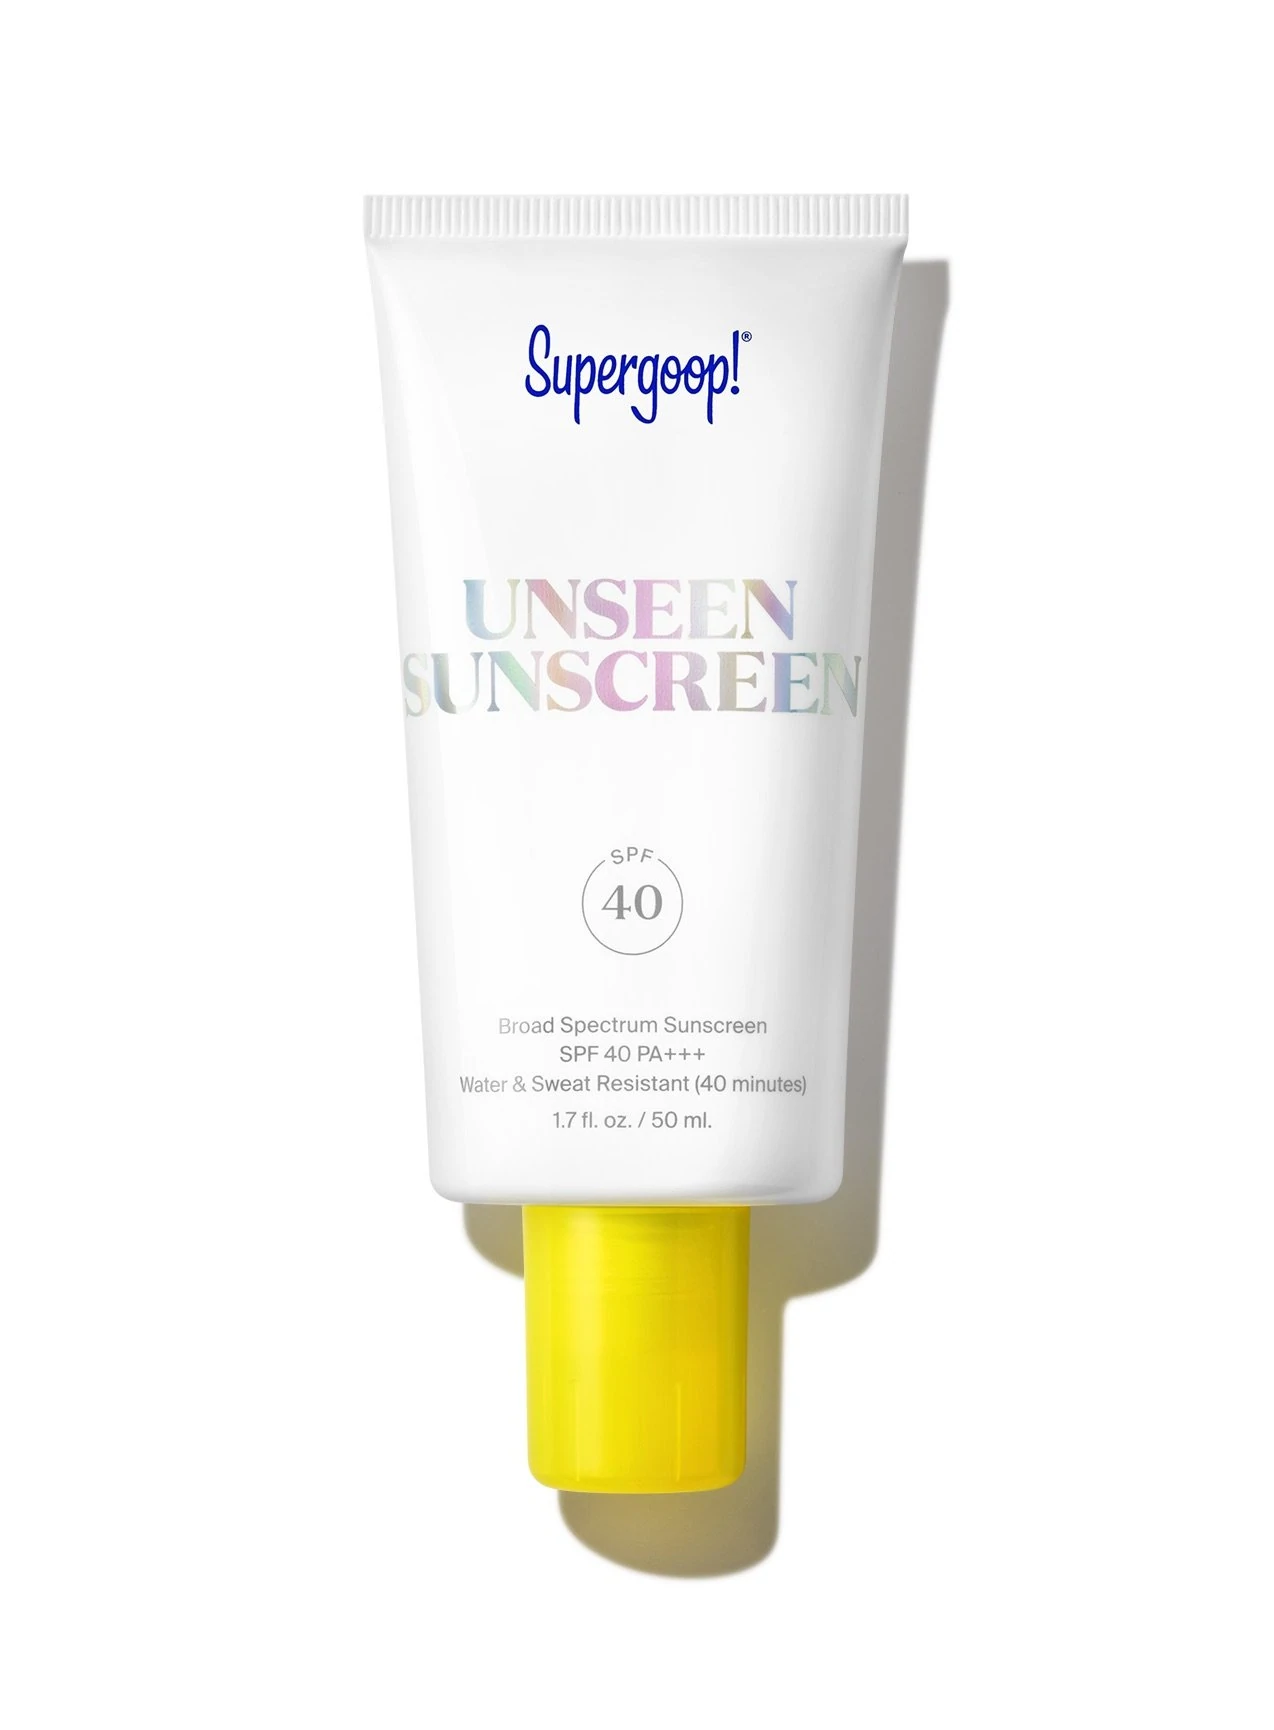 FEMMENORDIC's choice in the Supergoop vs Elta MD sunscreen comparison, the Supergoop Unseen Sunscreen